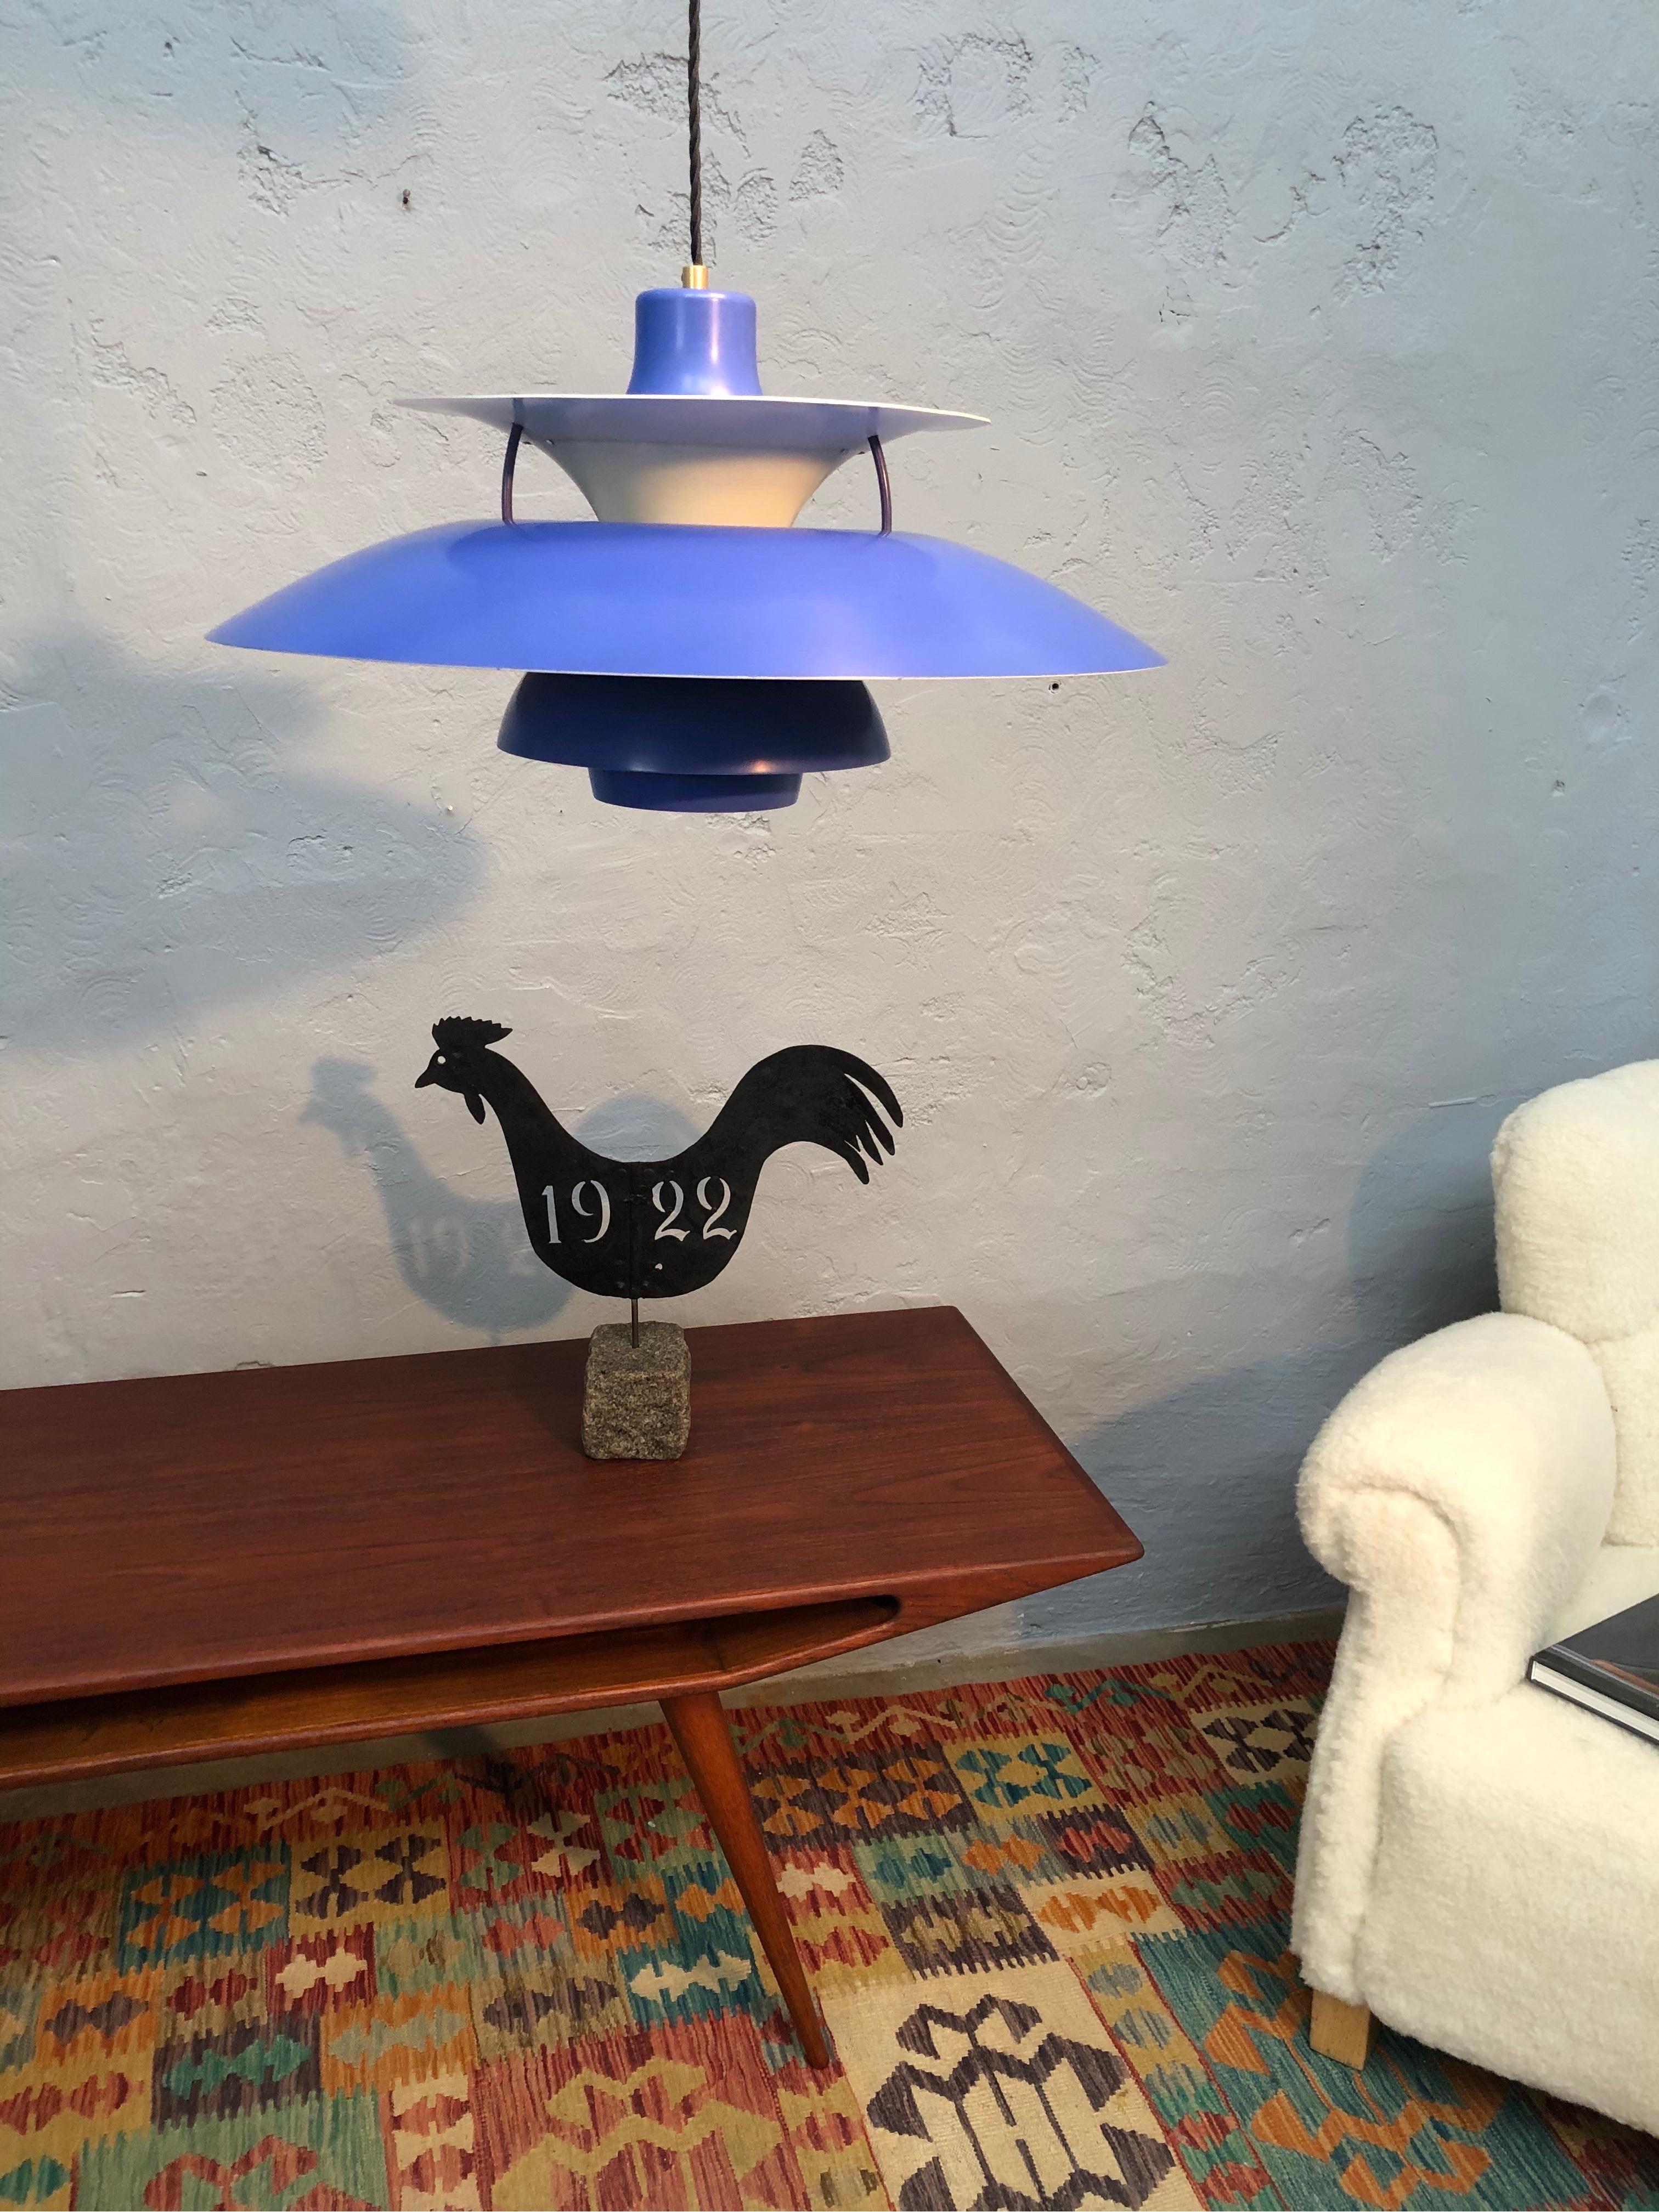 Iconic vintage PH 5 chandelier pendant lamp from 1959 in blue.
Poul Henningsen designed this iconic lamp in 1958. 
During the first year of production and in to 1959 they changed the design slightly to 2 of the shades.
Then in 1960 they changed the